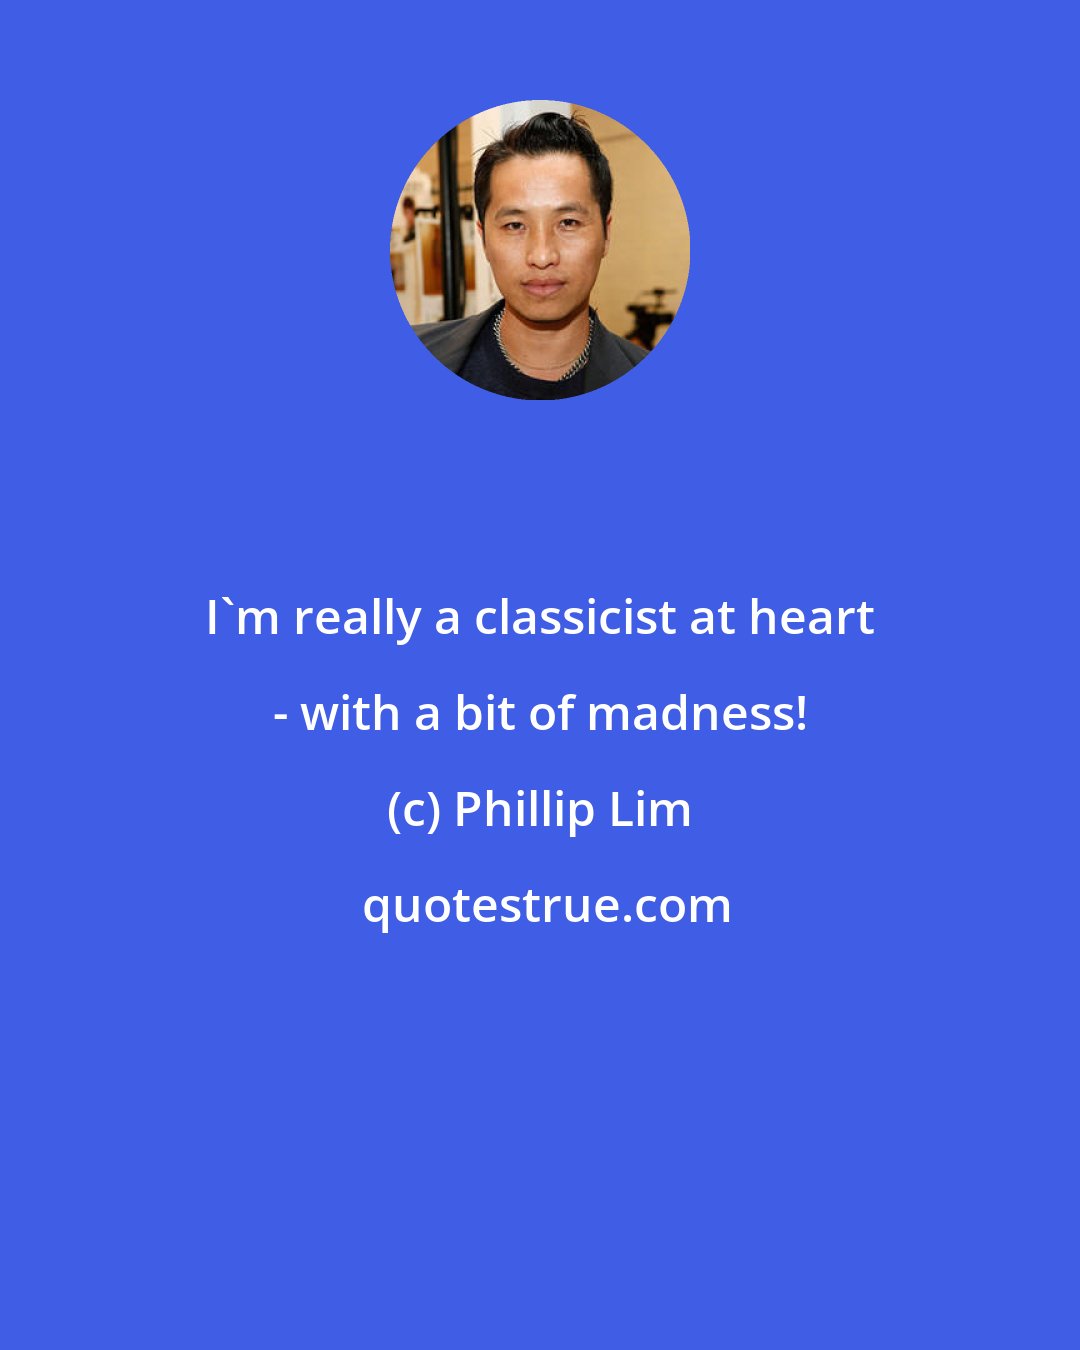 Phillip Lim: I'm really a classicist at heart - with a bit of madness!